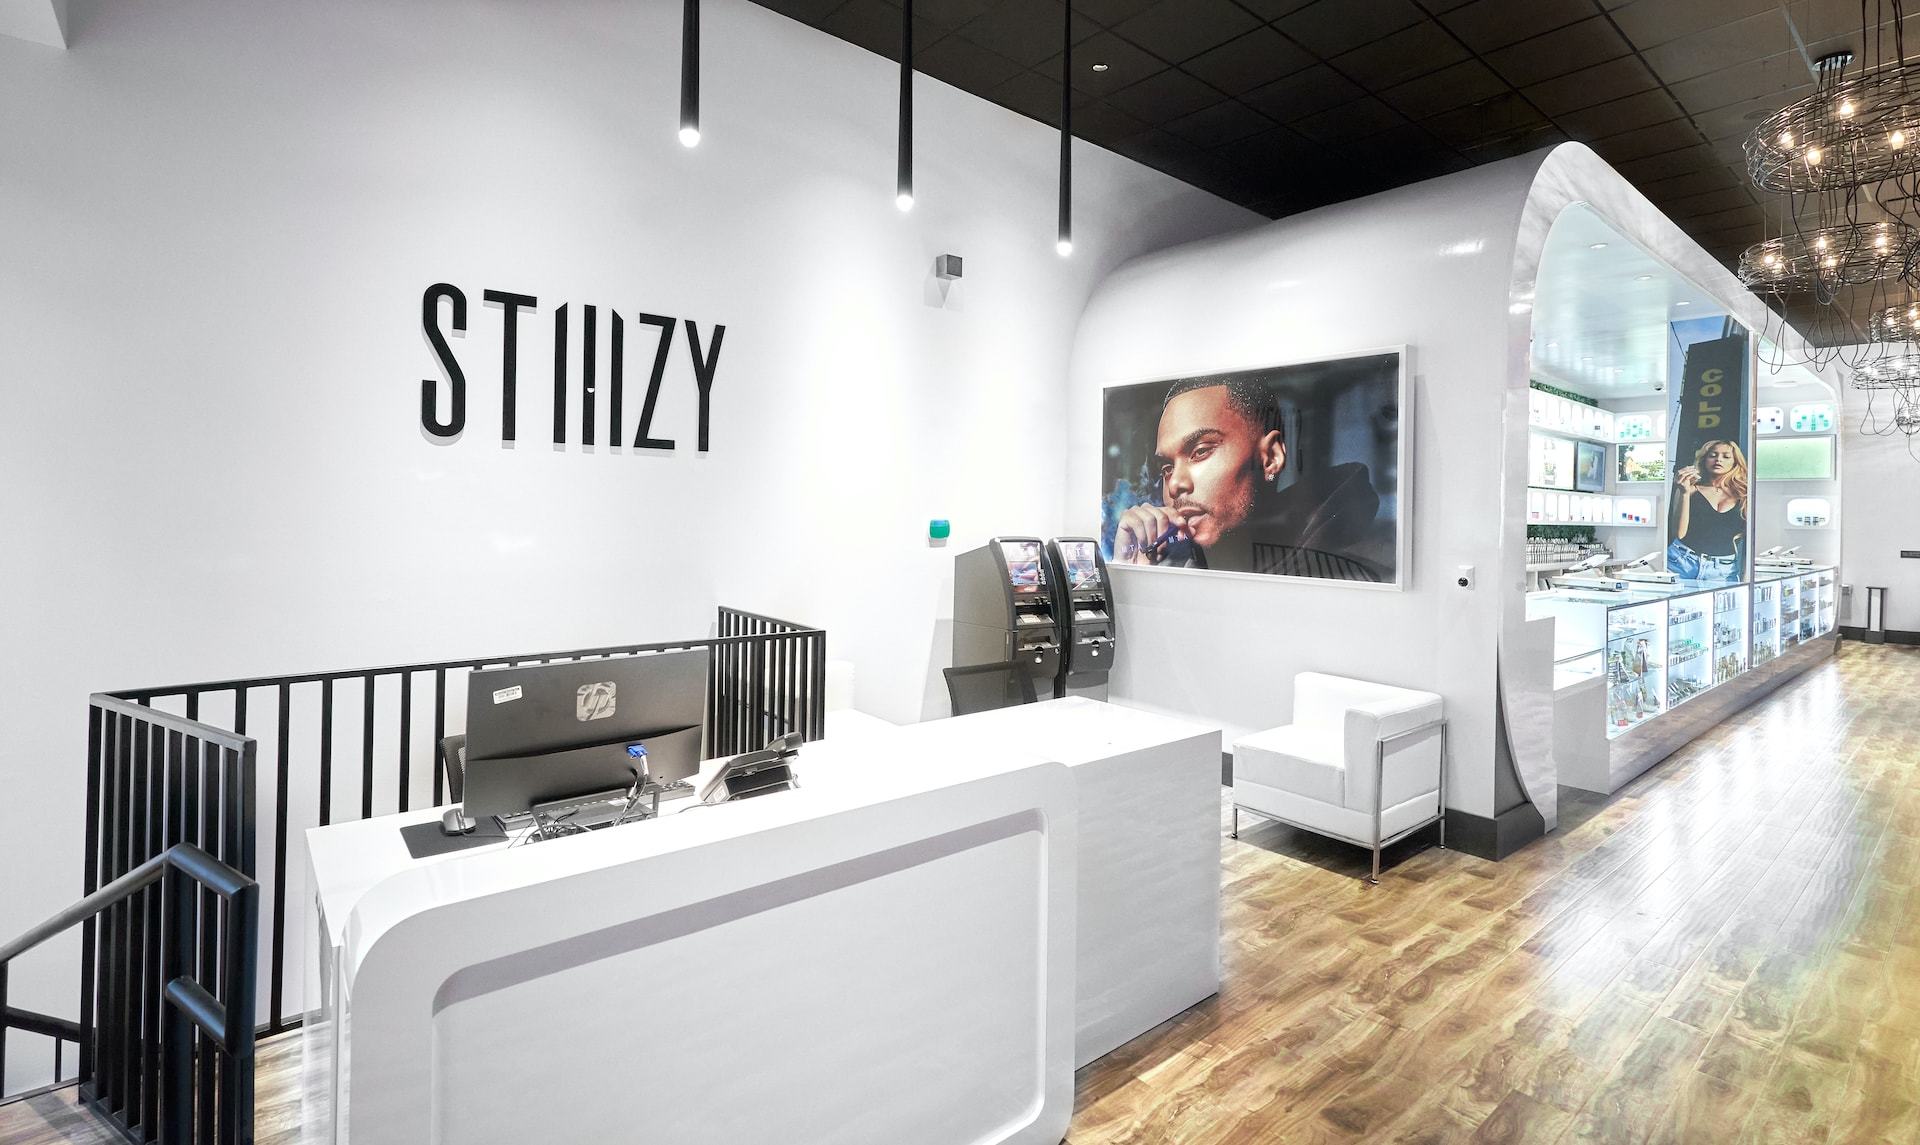 STIIIZY UNION SQUARE PAVING A PATH FOR LATINA WOMEN IN CANNABIS